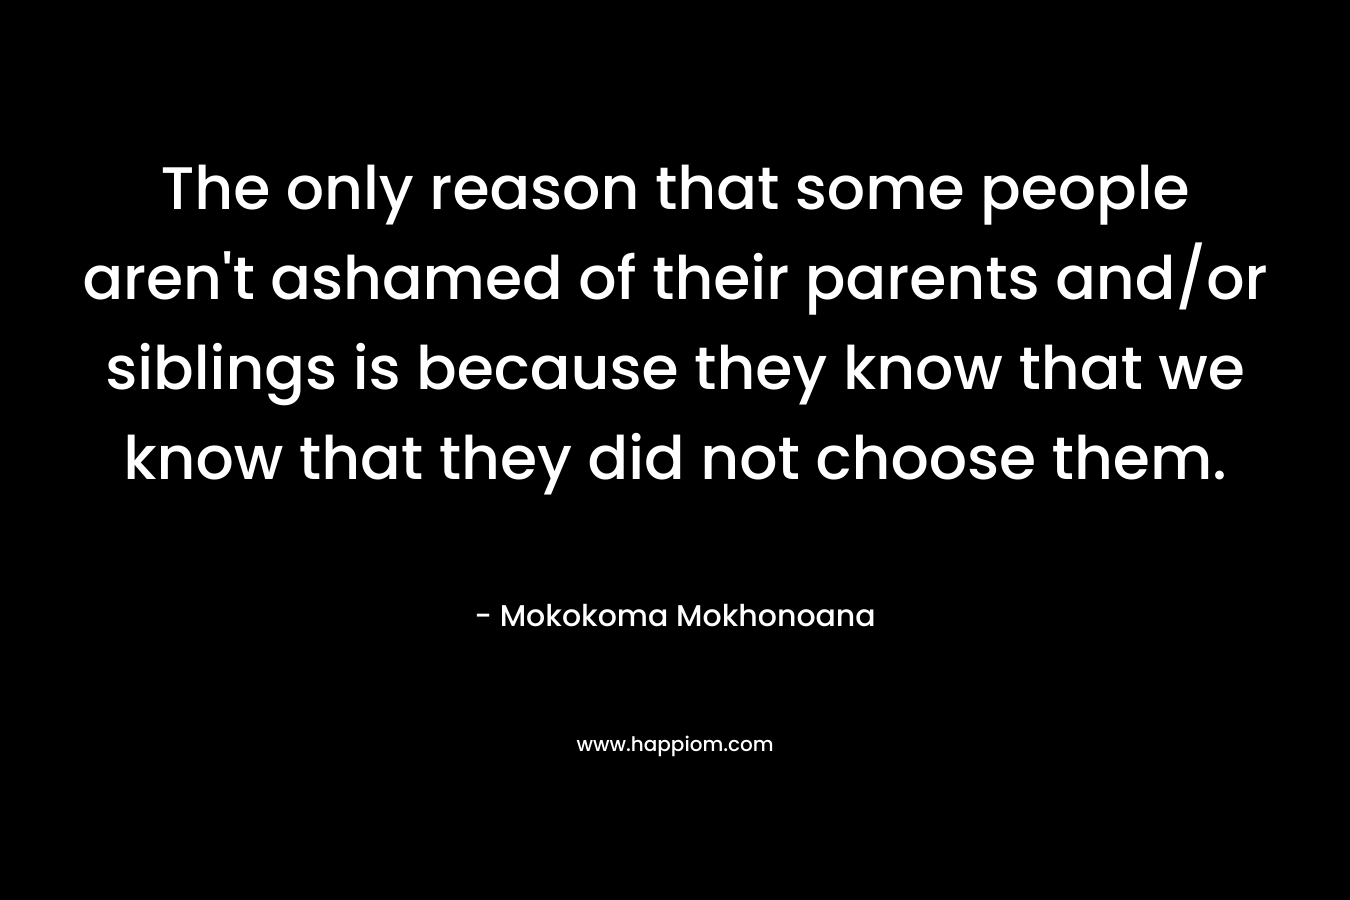 The only reason that some people aren’t ashamed of their parents and/or siblings is because they know that we know that they did not choose them. – Mokokoma Mokhonoana